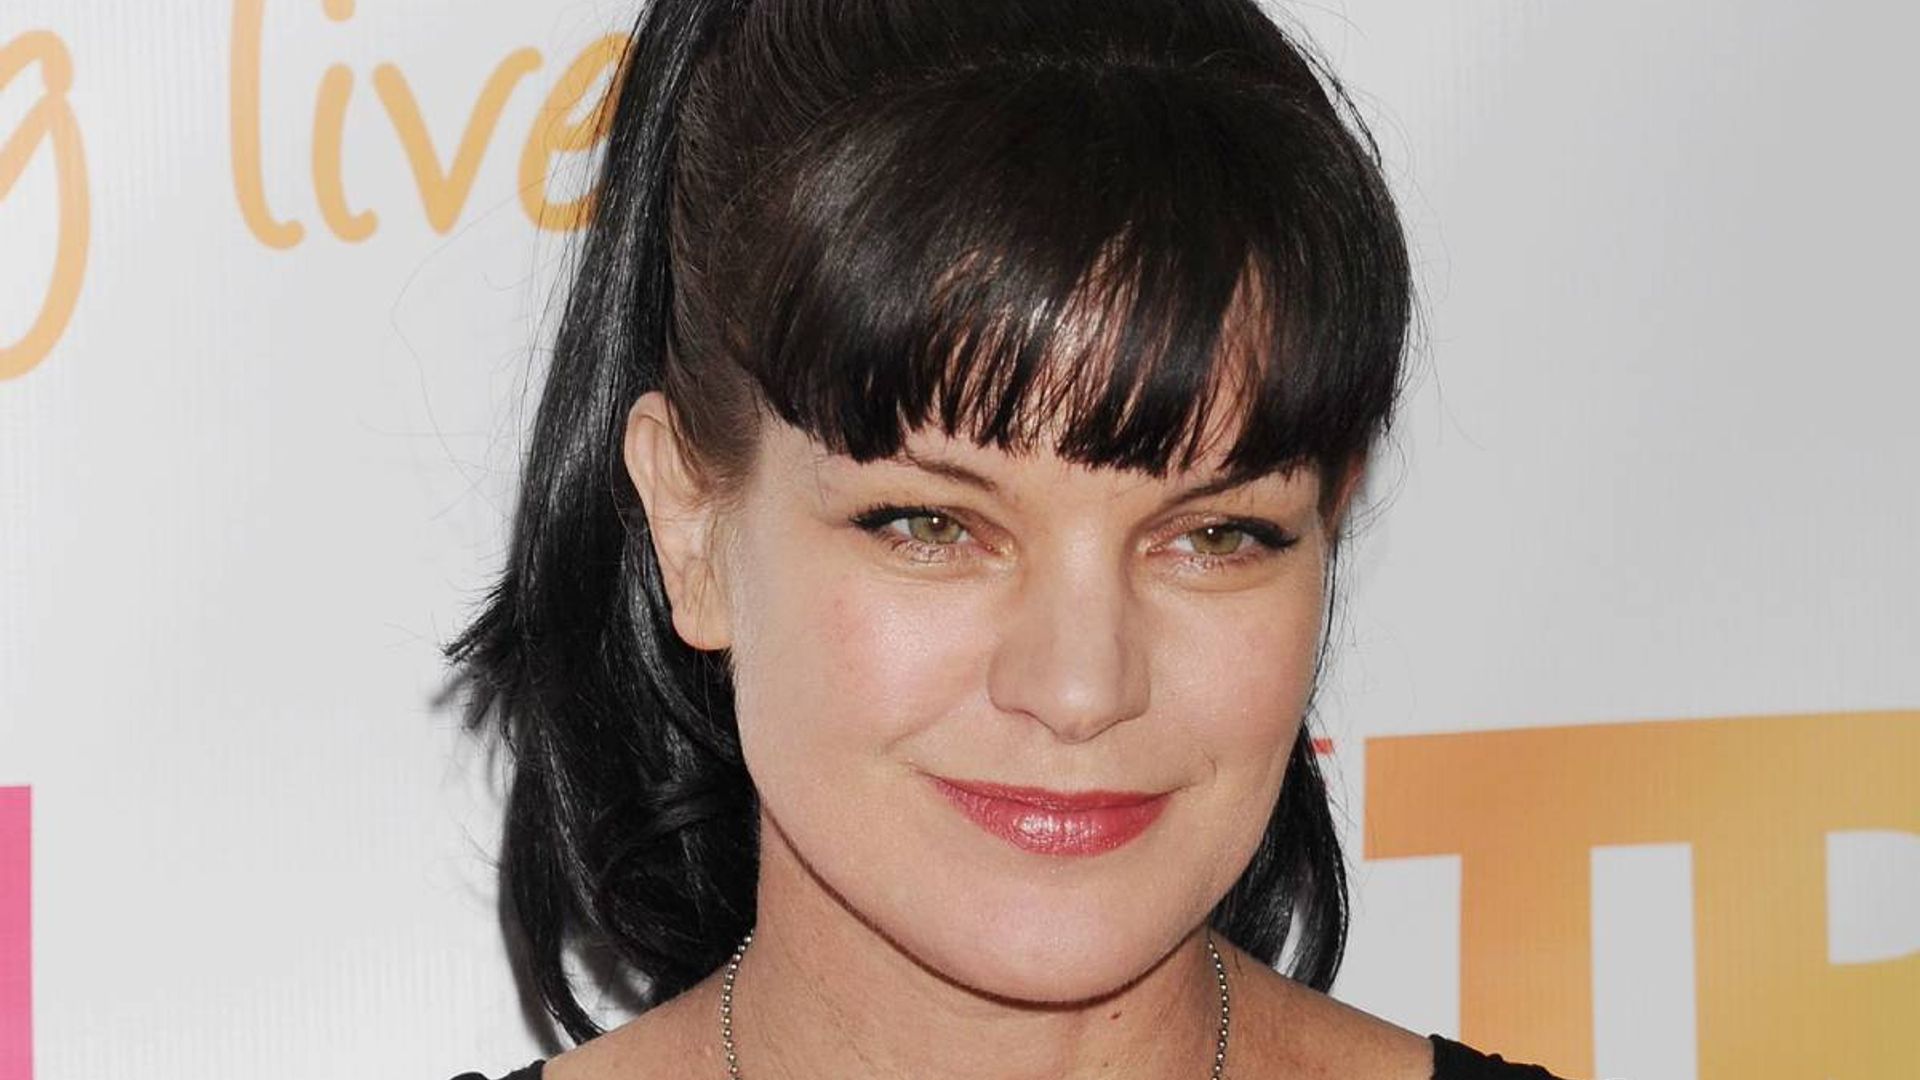 ncis pauley perrette emotional message new photo